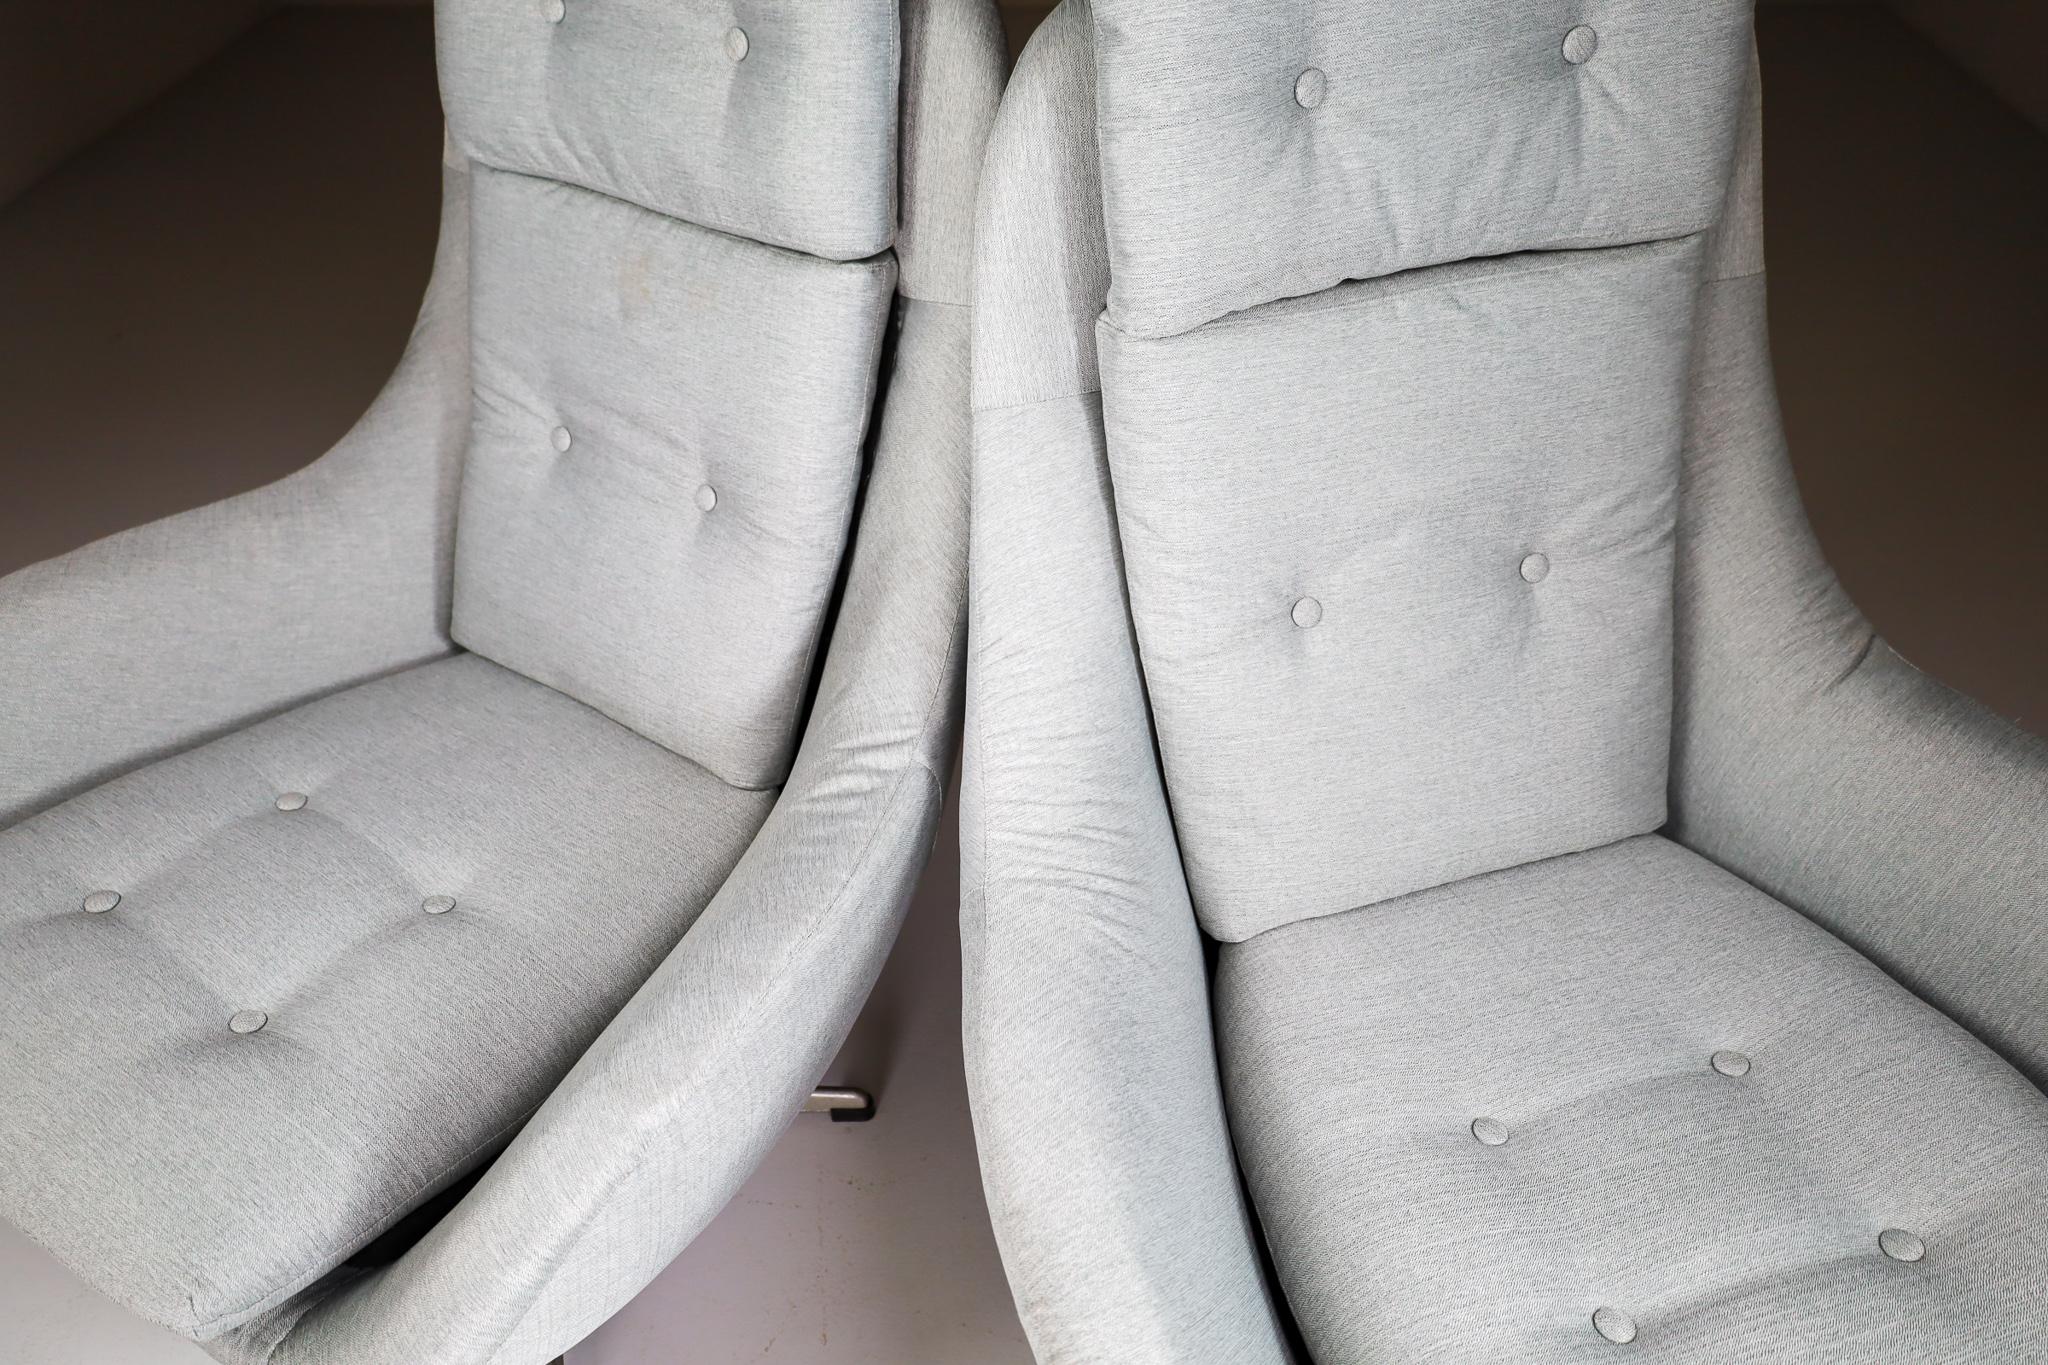 Midcentury Swivel Chair in New Reupholstered Fabric, Czech Republic 1970 For Sale 4